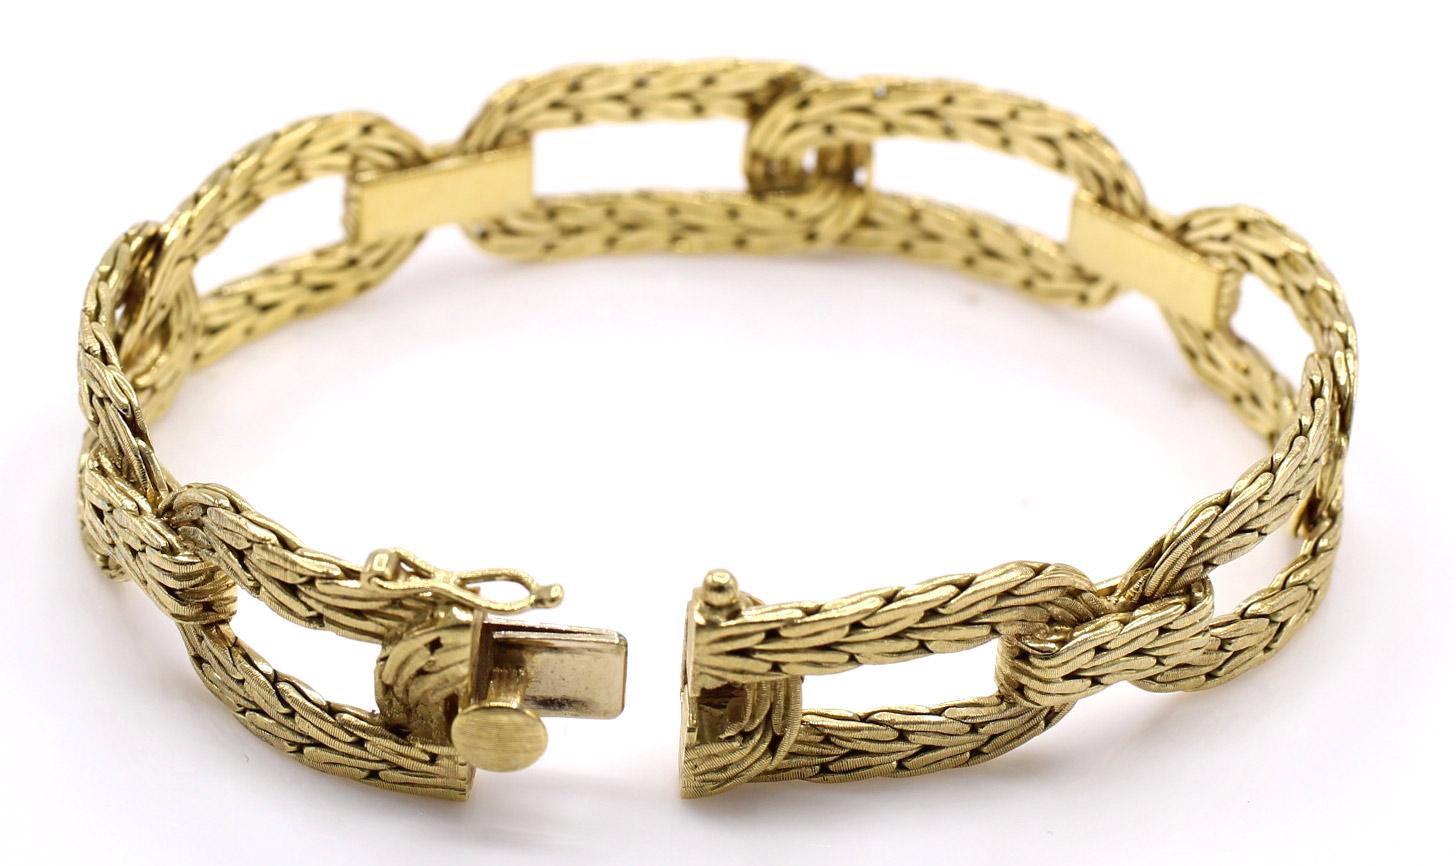 Buccellati Braided 18 Karat Yellow Gold Link Bracelet  In Excellent Condition For Sale In New York, NY